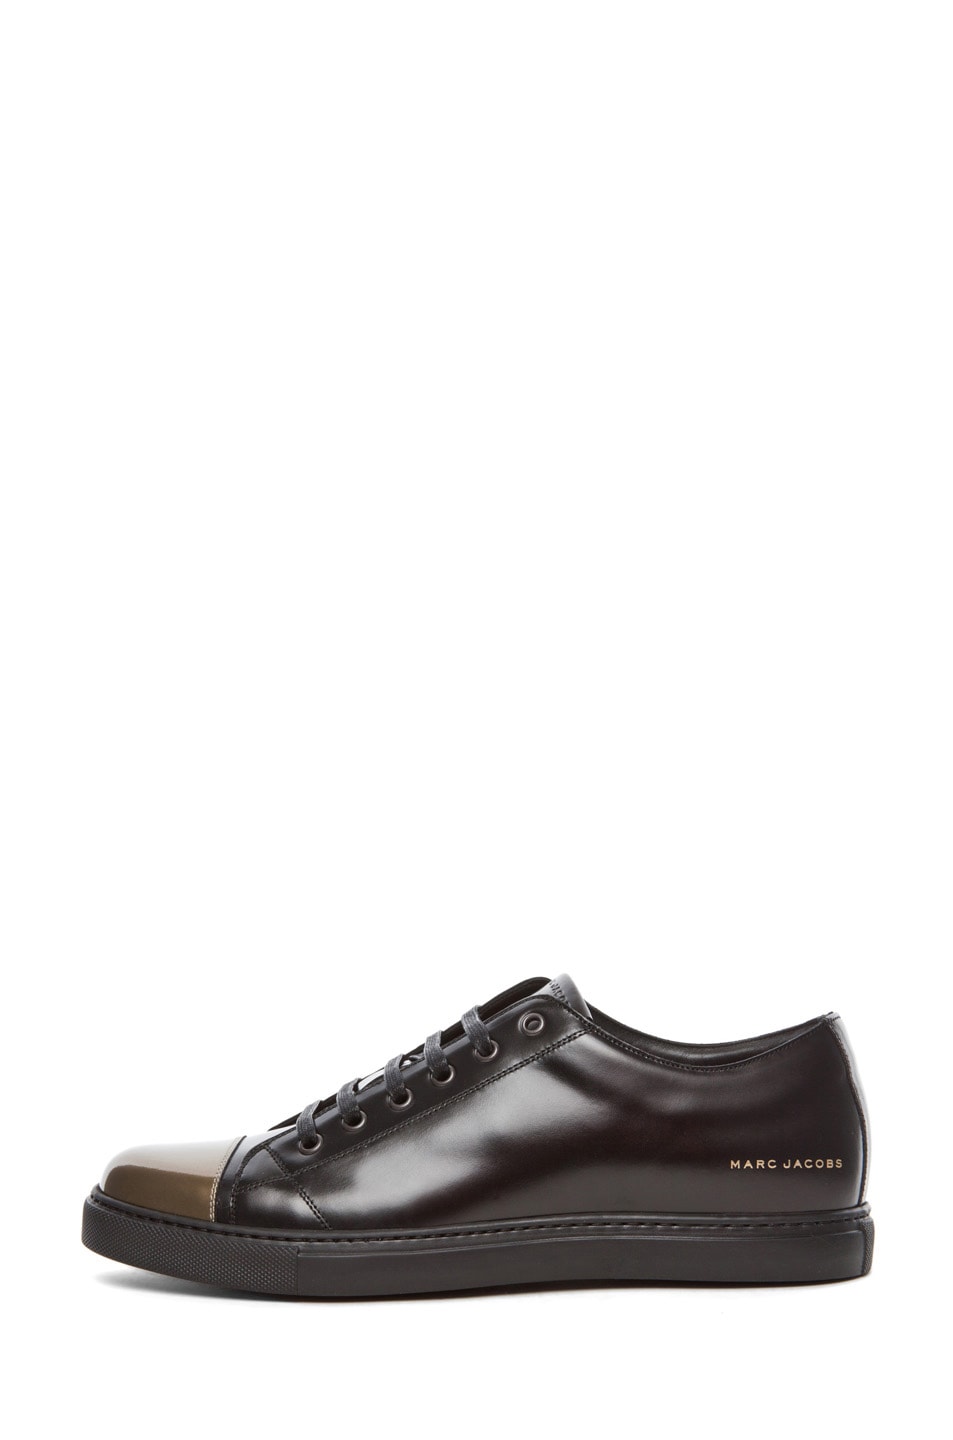 Image 1 of Marc Jacobs Sneakers in Black & Gold